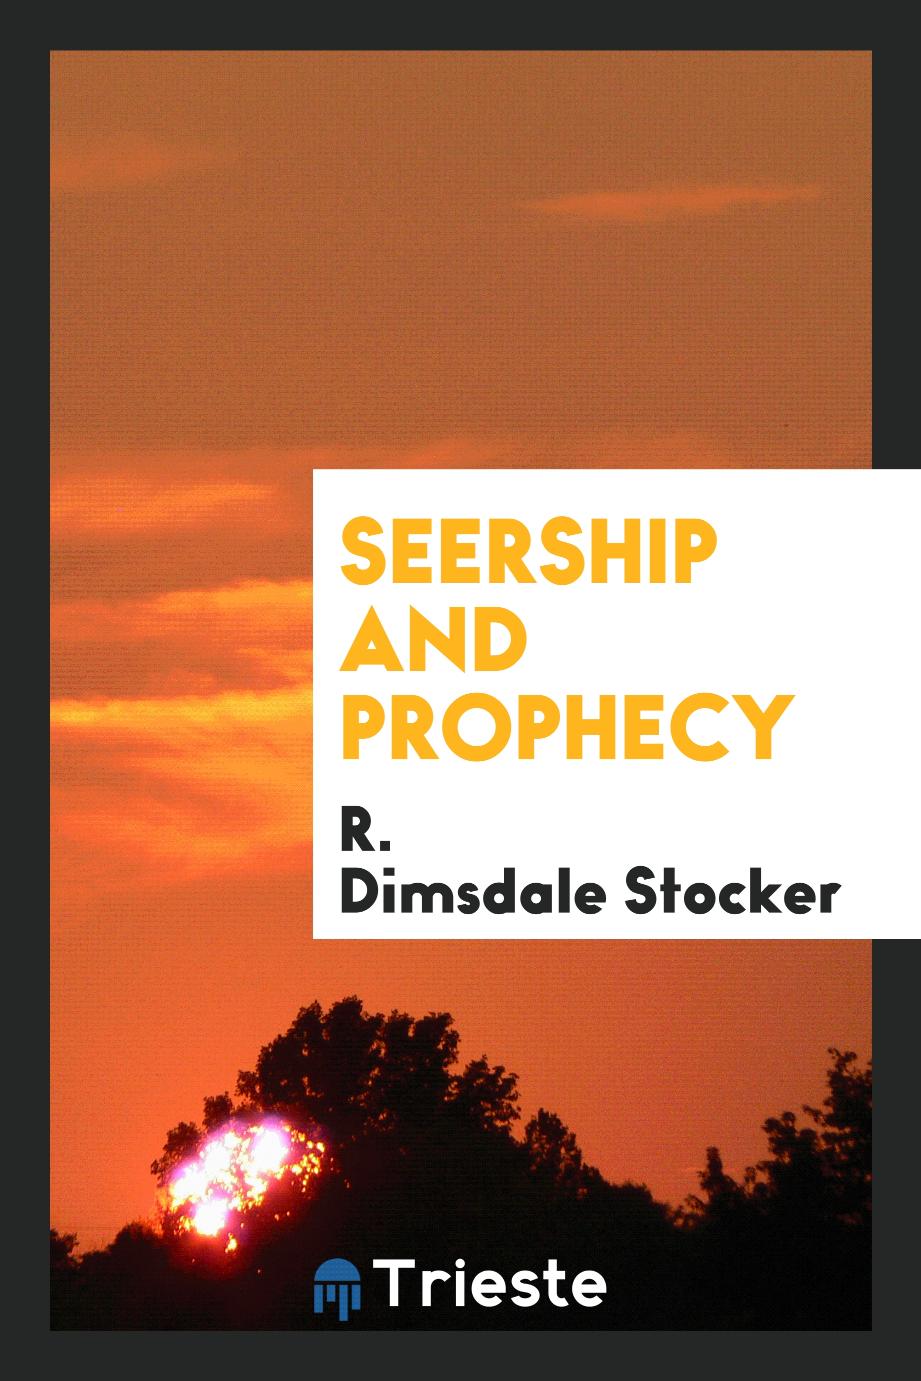 Seership and prophecy